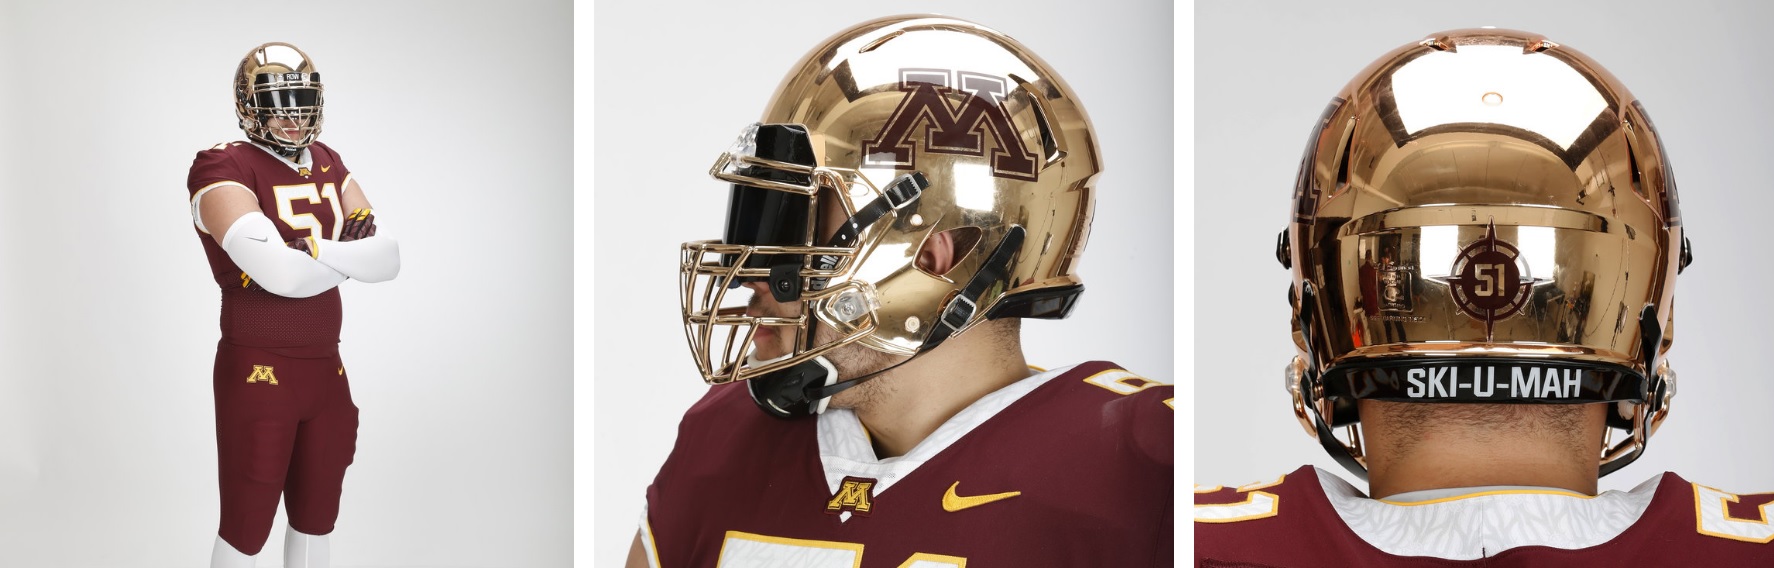 The Minnesota Gophers Football Team Unveils New Nike Uniforms With More